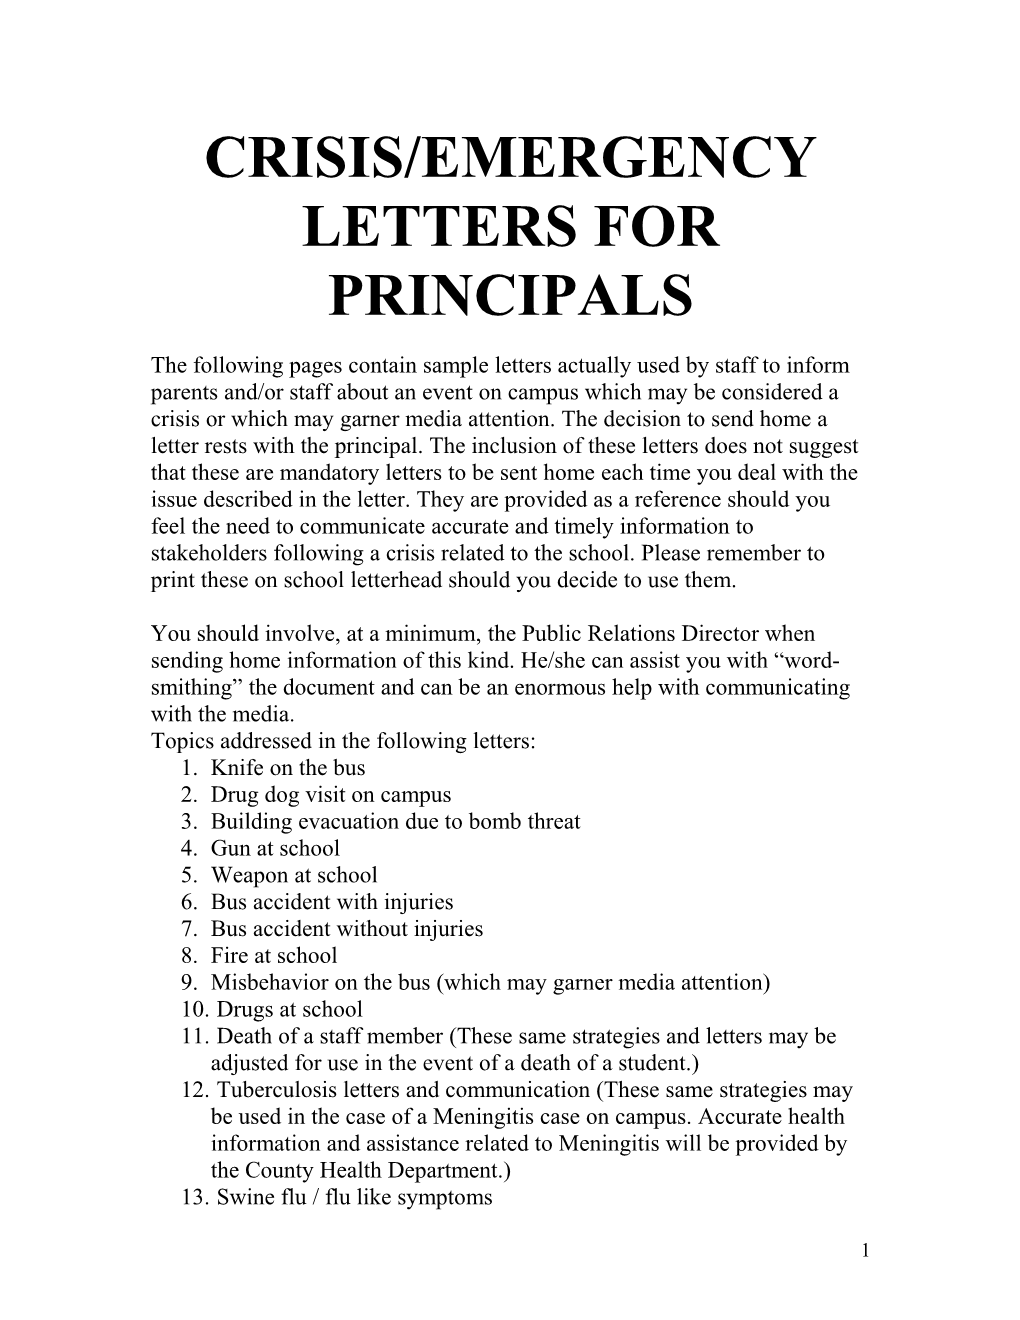 Crisis/Emergency Letters for Principals